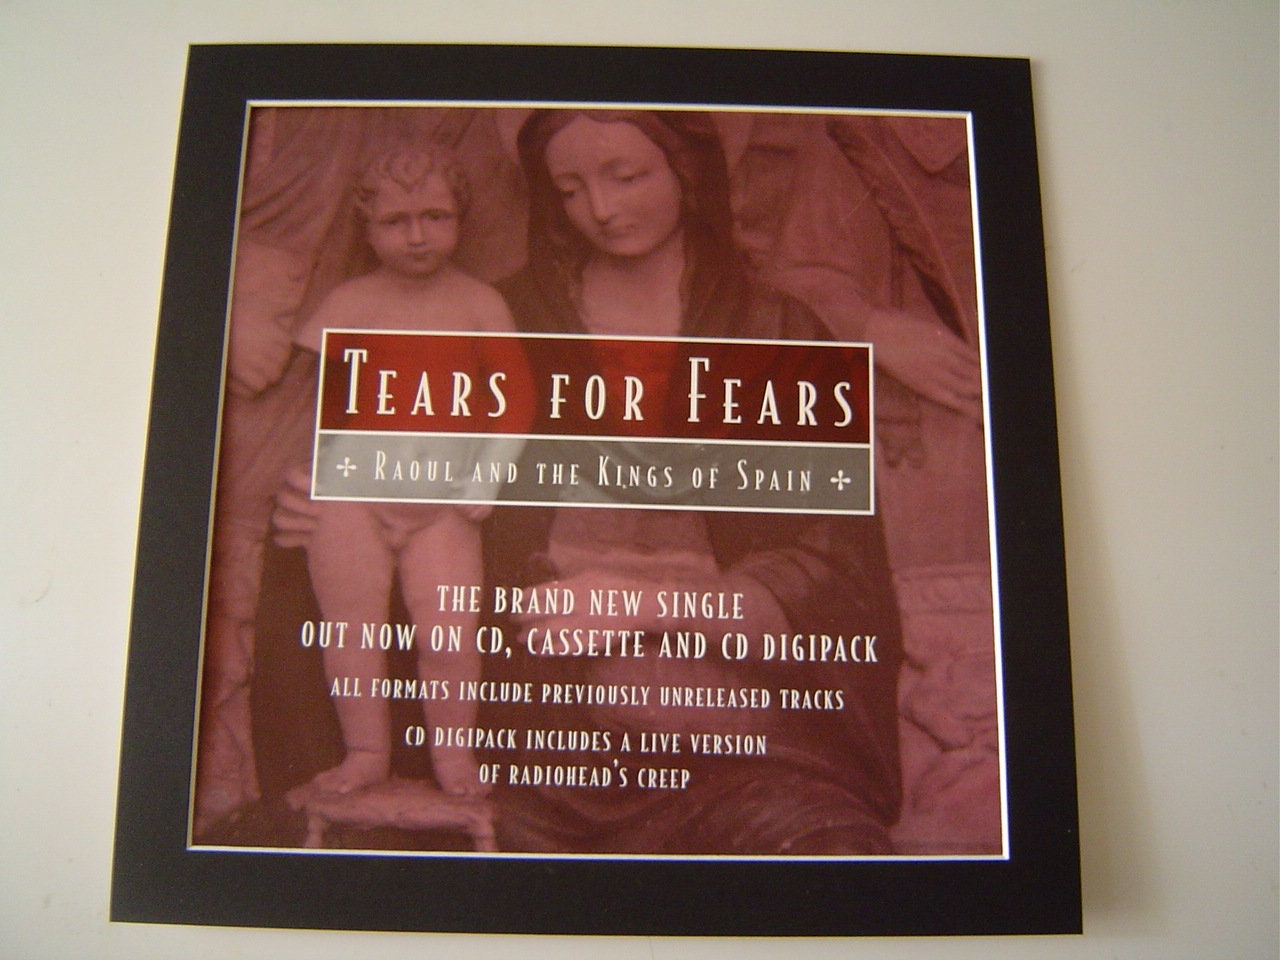 Tears For Fears Shout Song Lyric Vintage Quote Print - Red Heart Print